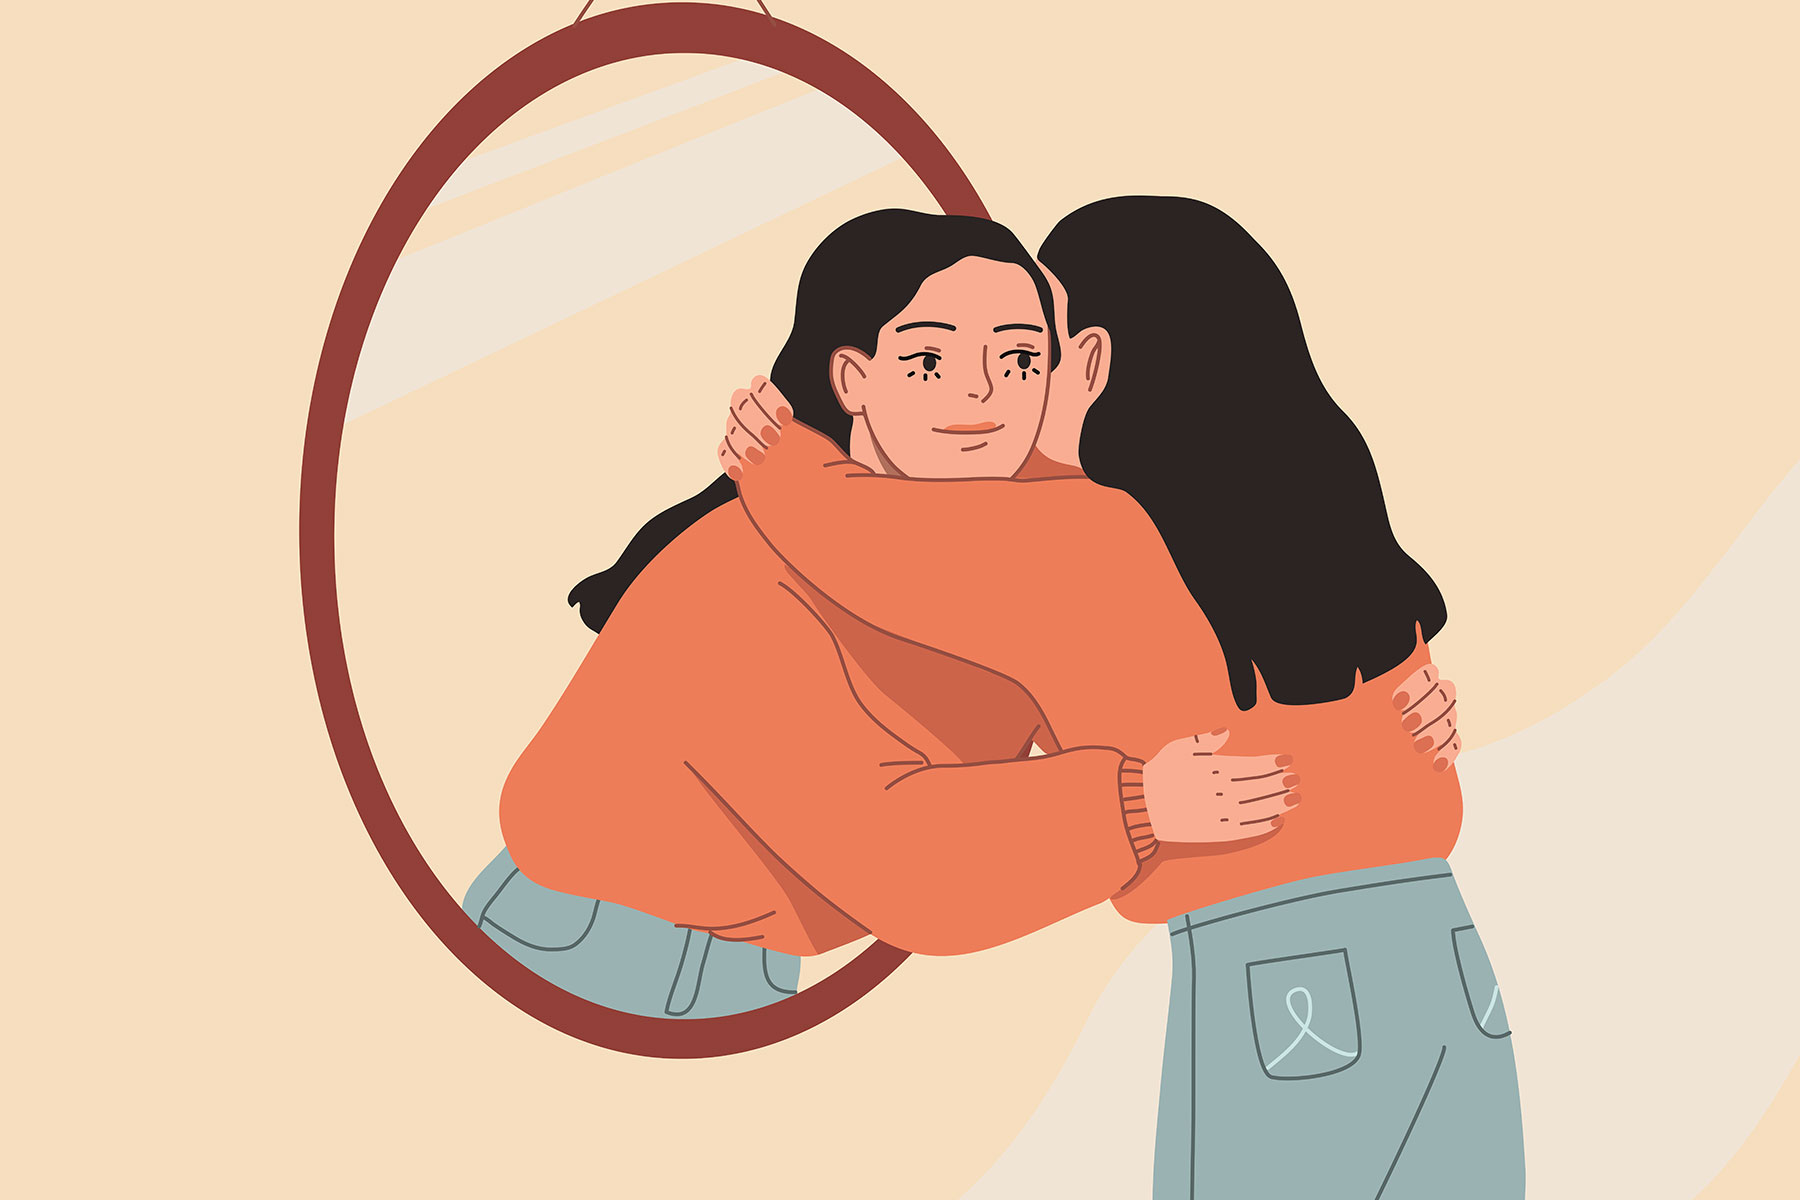 cartoon image of person hugging themselves and reminding themselves that they are more than enough